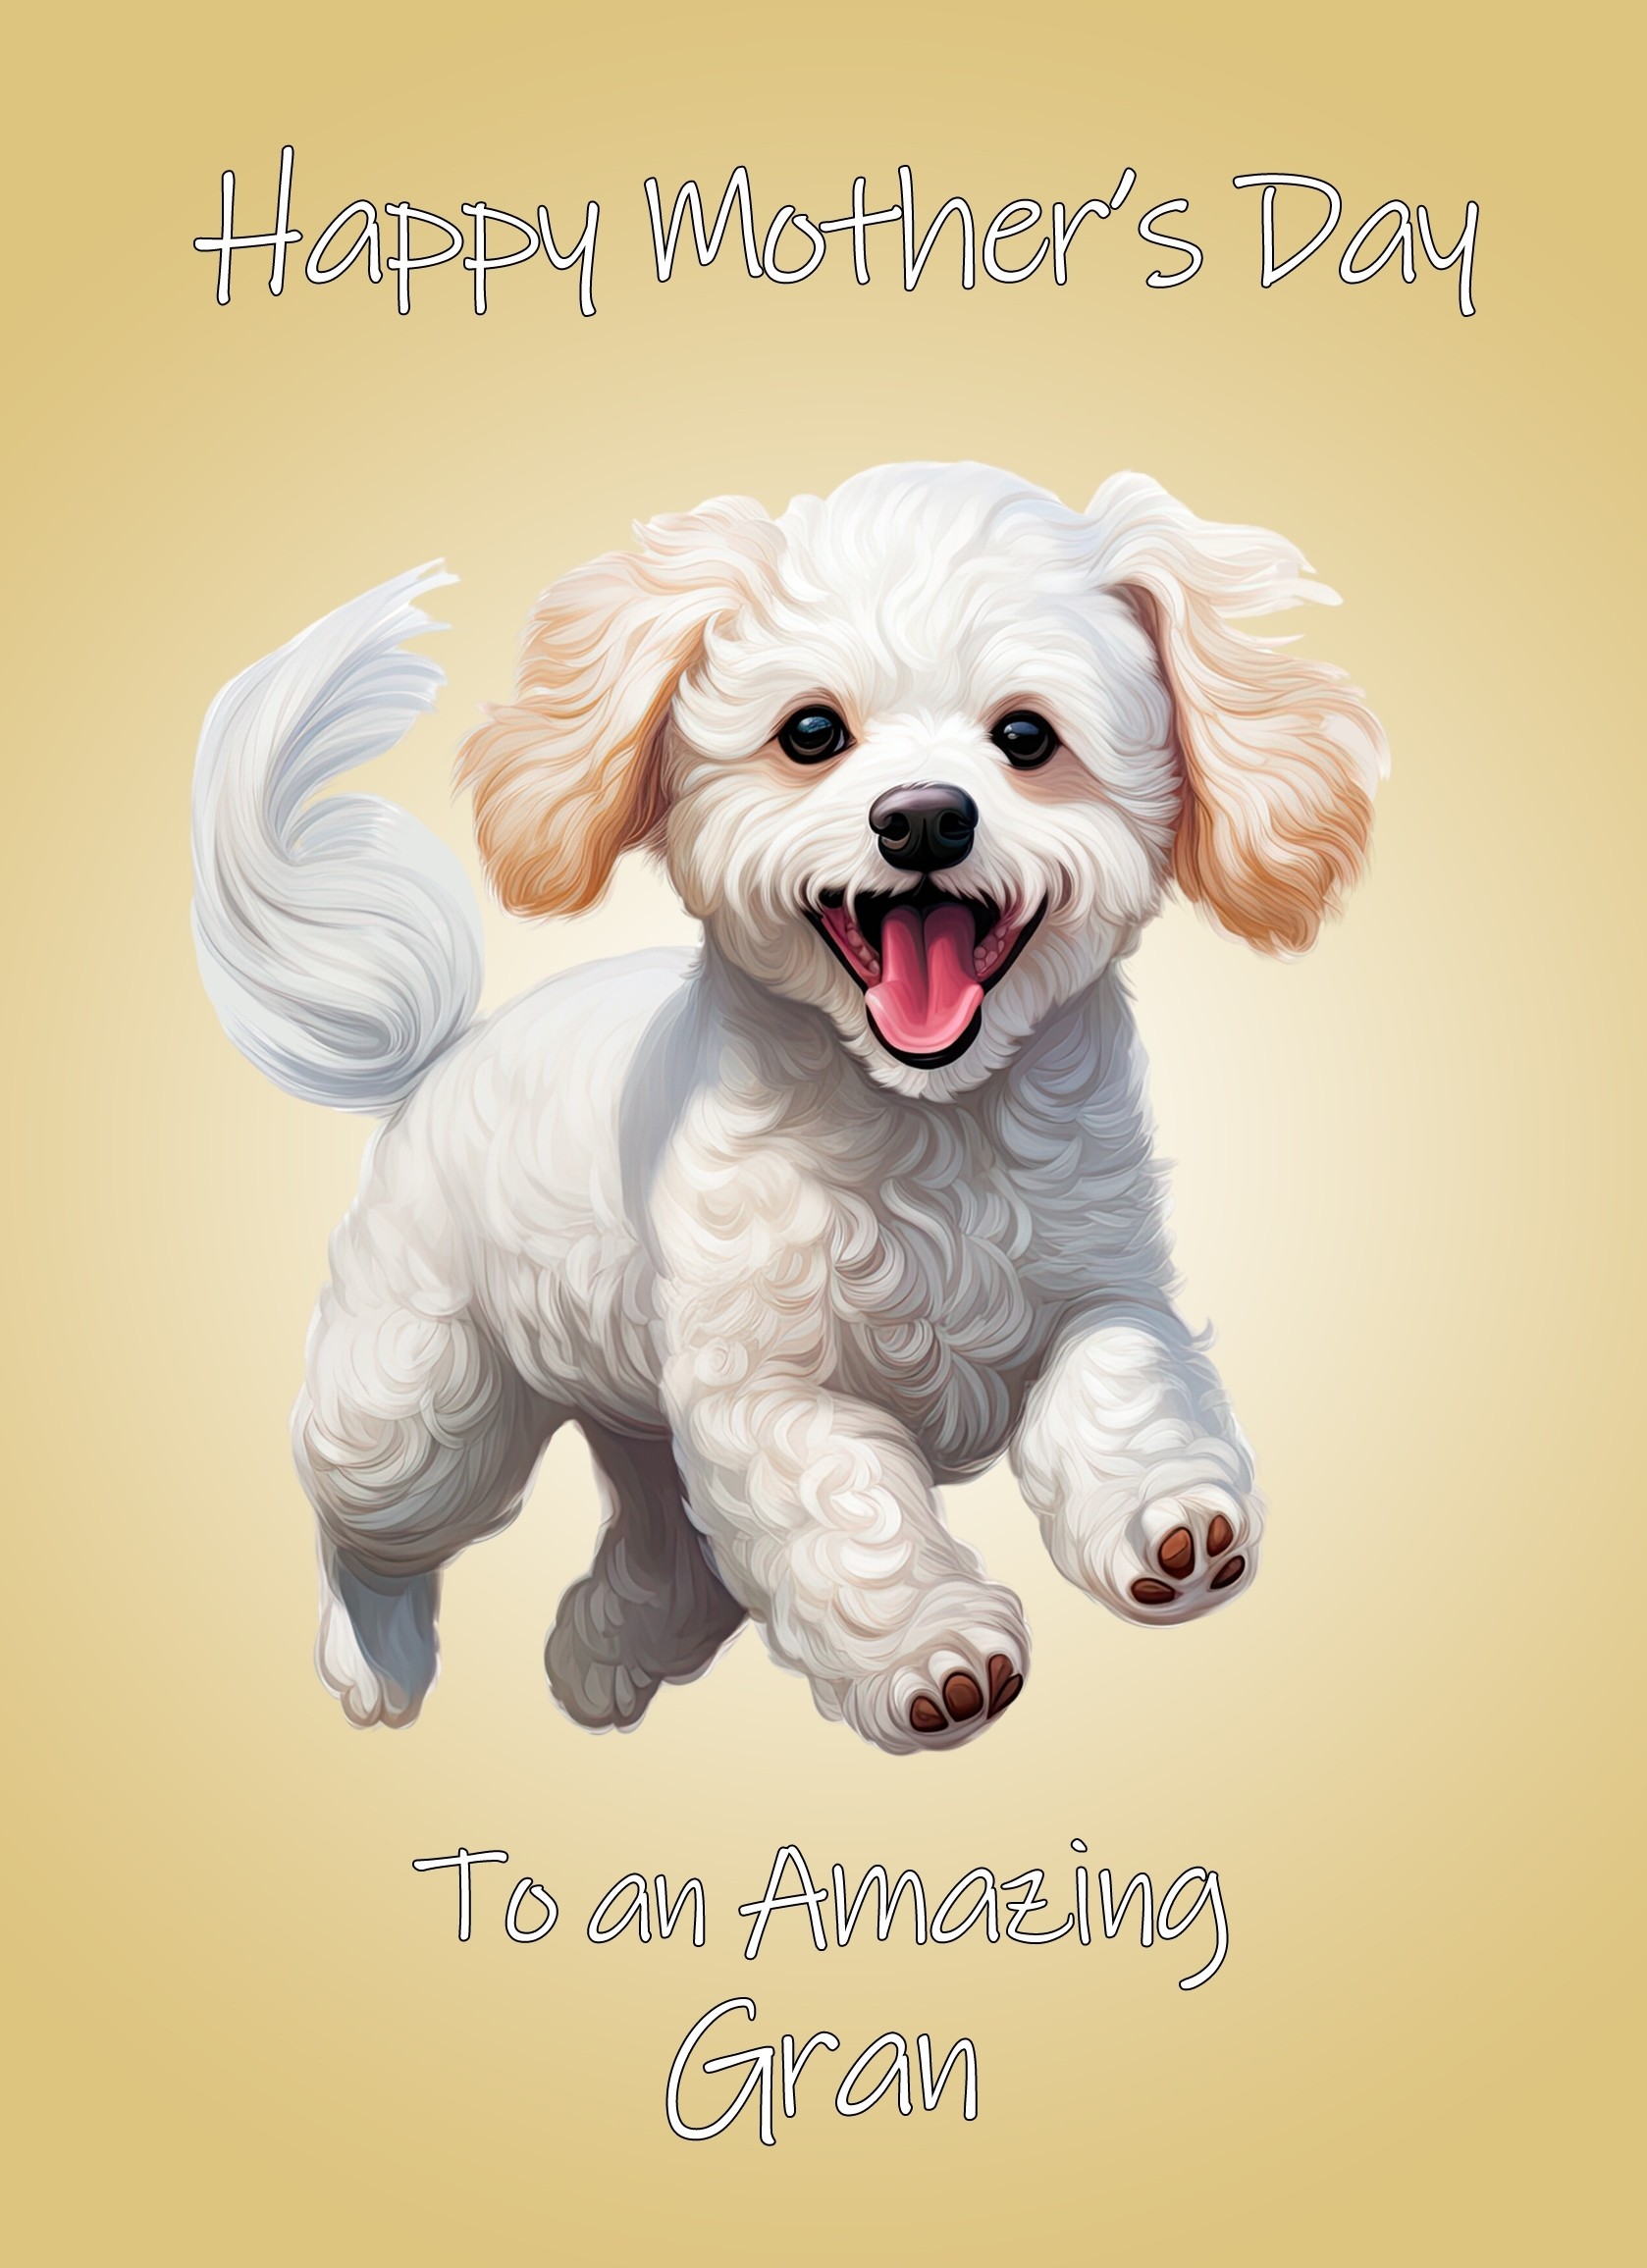 Poodle Dog Mothers Day Card For Gran